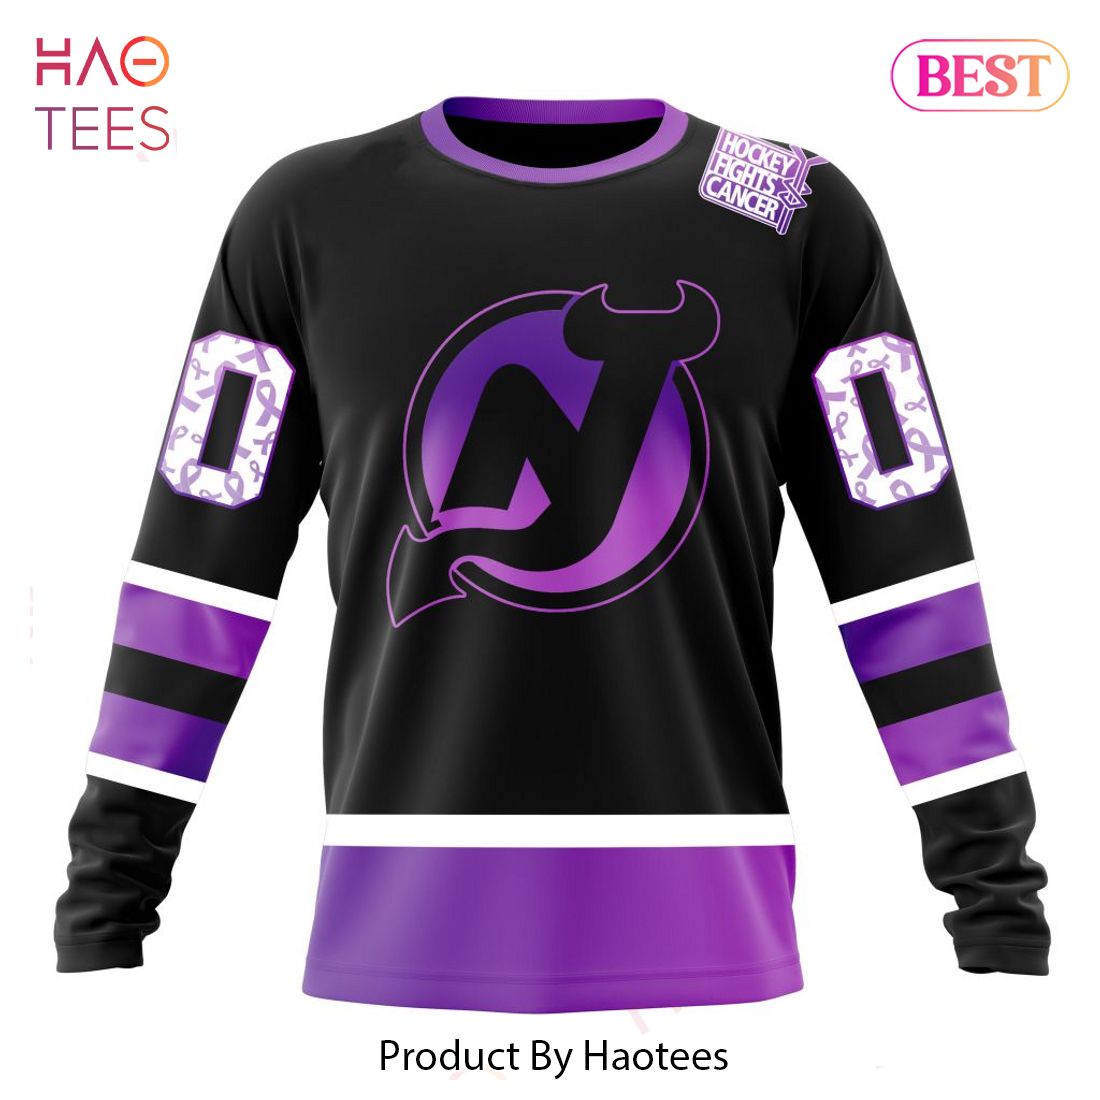 New Jersey Devils White Hockey Fights Cancer Logo Personalized